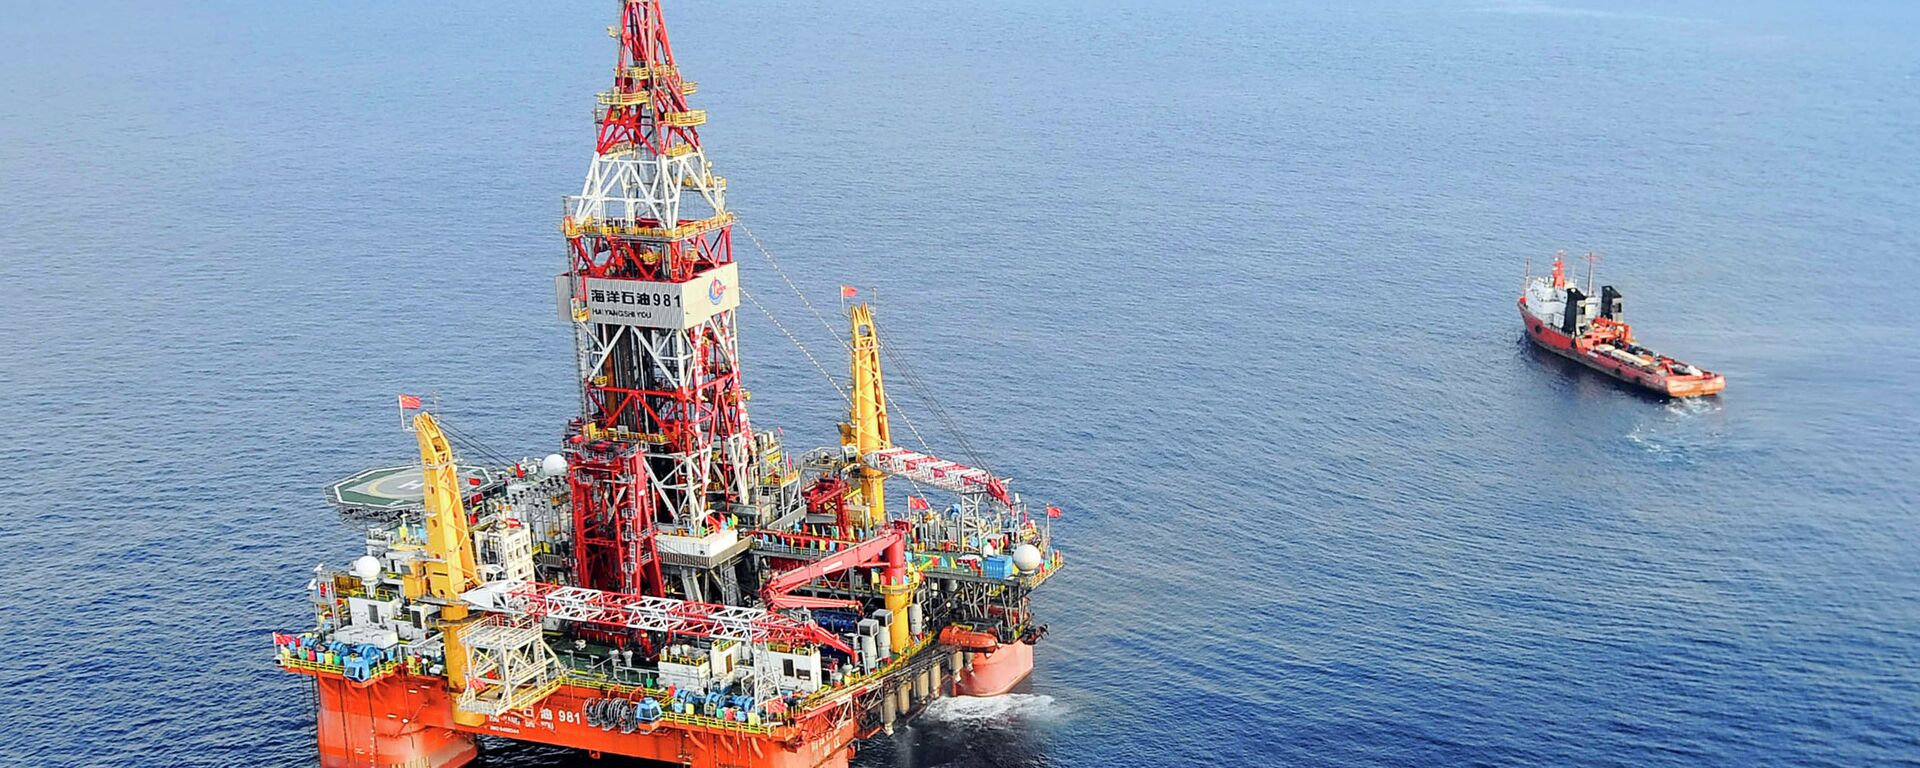 Haiyang Shiyou oil rig 981, the first deep-water drilling rig developed in China, is pictured at 320 kilometers (200 miles) southeast of Hong Kong in the South China Sea. - Sputnik International, 1920, 23.06.2022